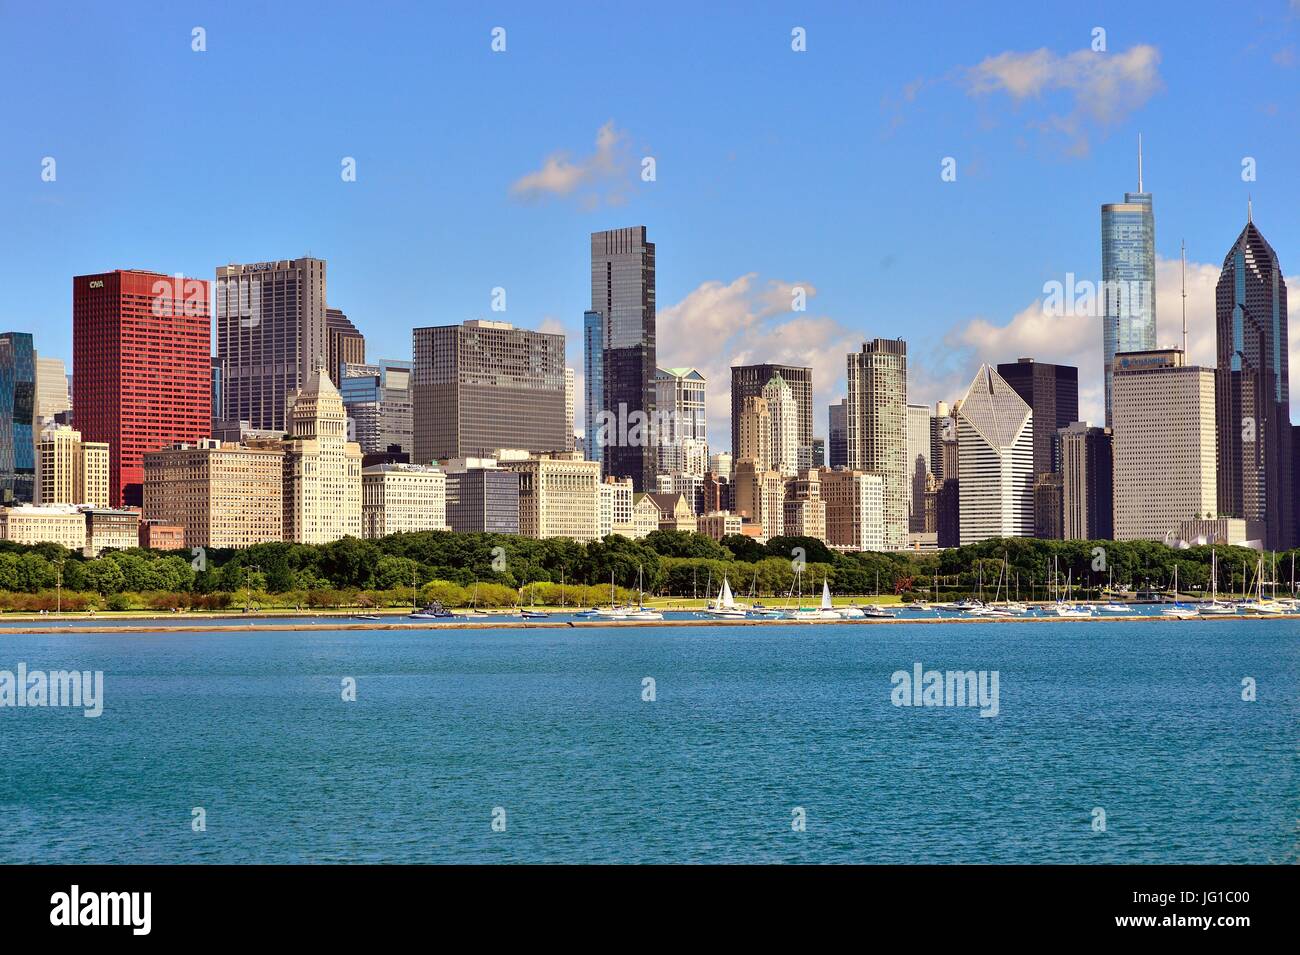 Monroe Street Harbor and Lake Michigan provide a foreground to a segment of the Chicago skyline. Chicago, Illinois, USA. Stock Photo